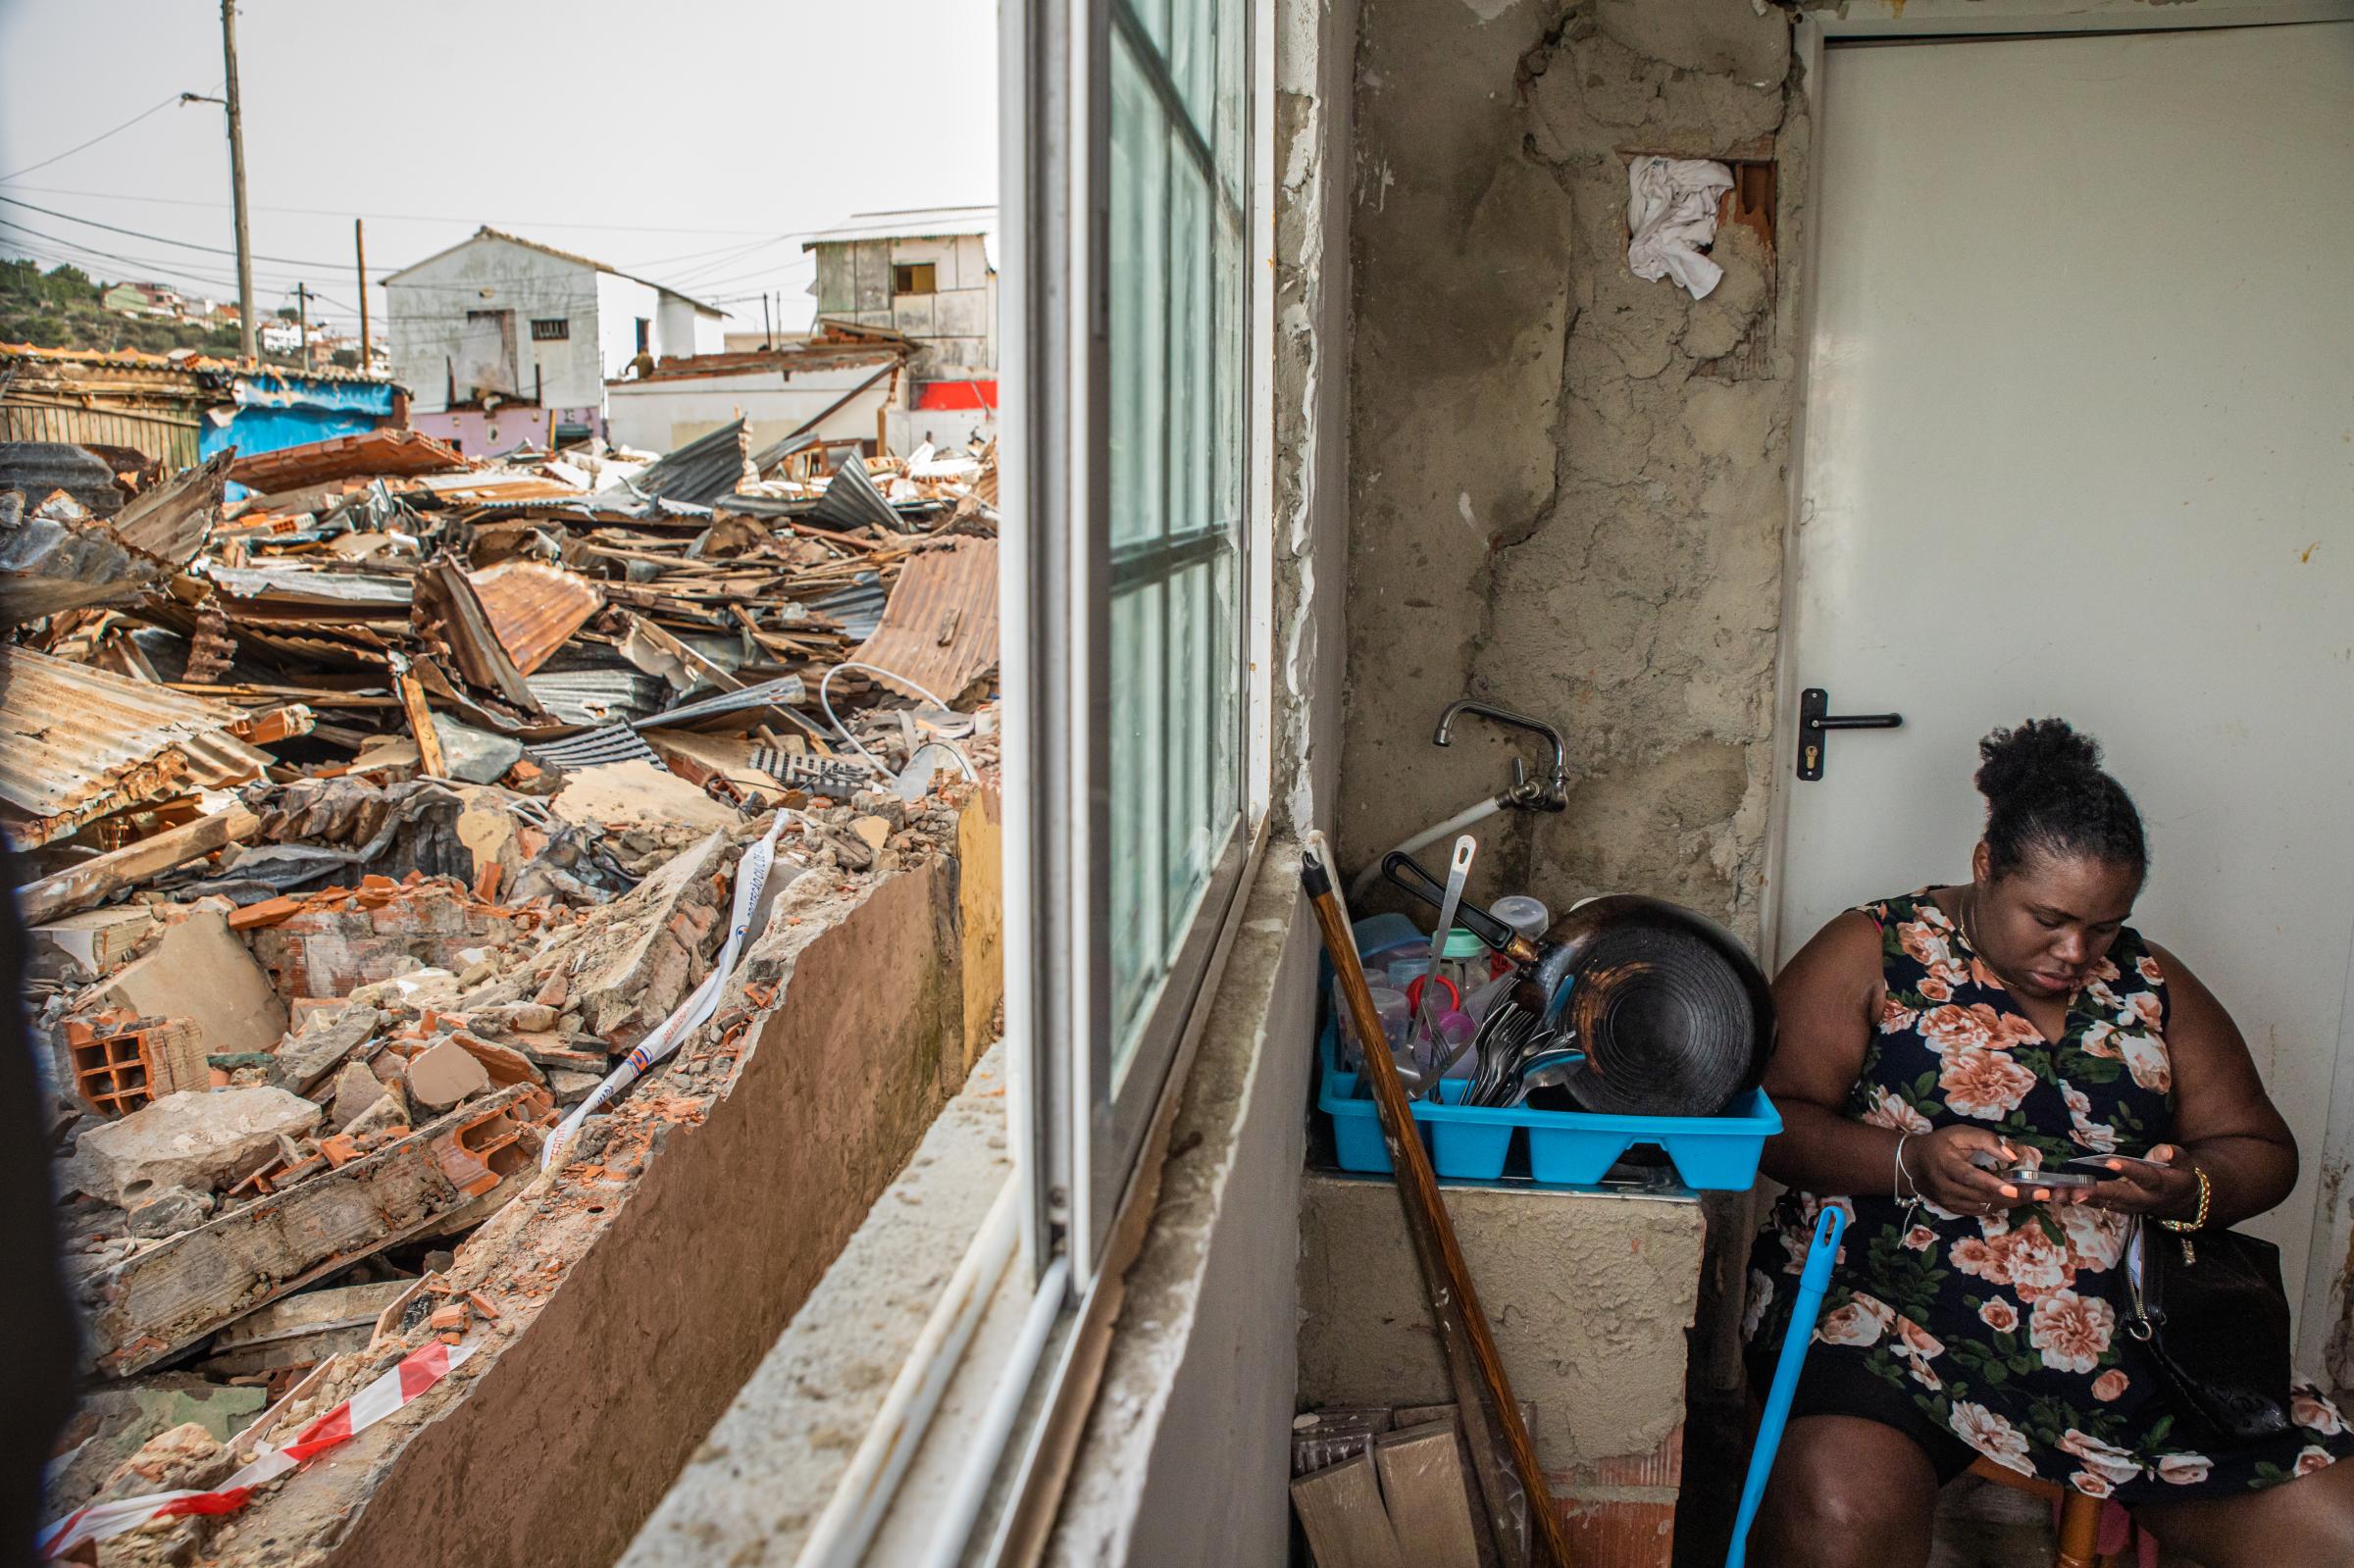 The Aftermath 2º Torrão - A resident's perspective of the house. So far, the...